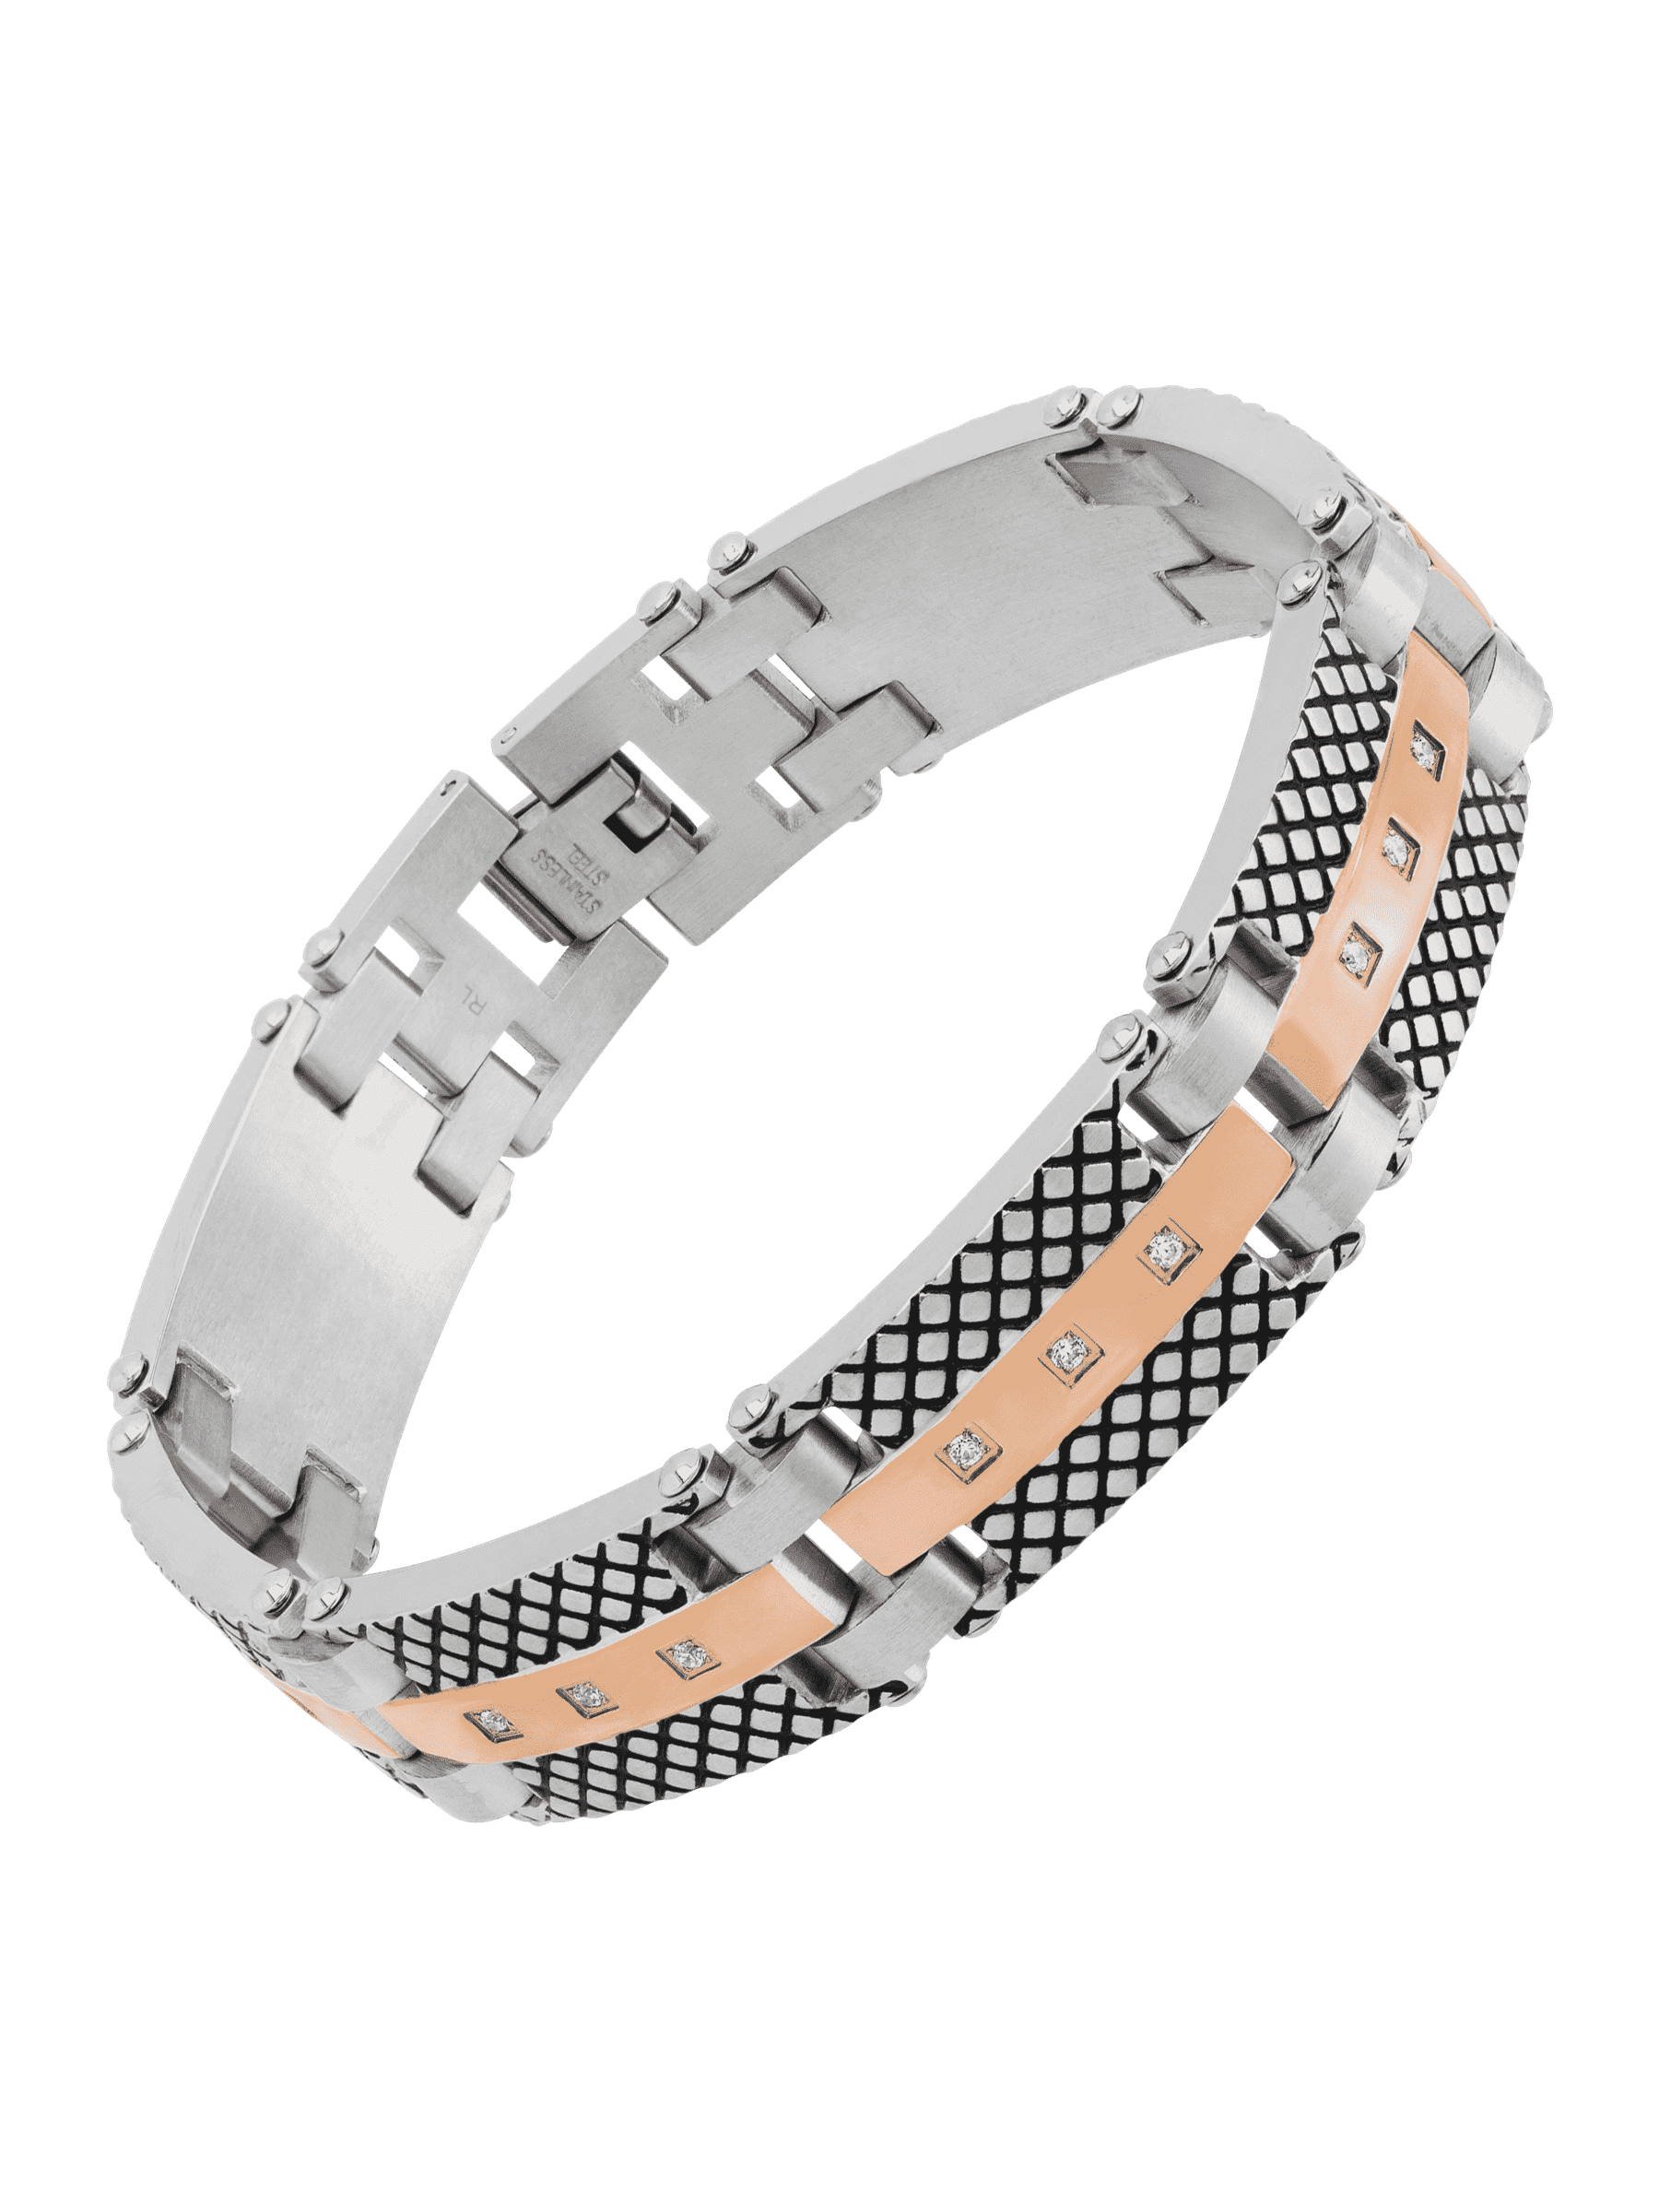 Befitting Finecraft Men's Ribbed Two-Tone Link Bracelet in Stainless Steel, 8.5"